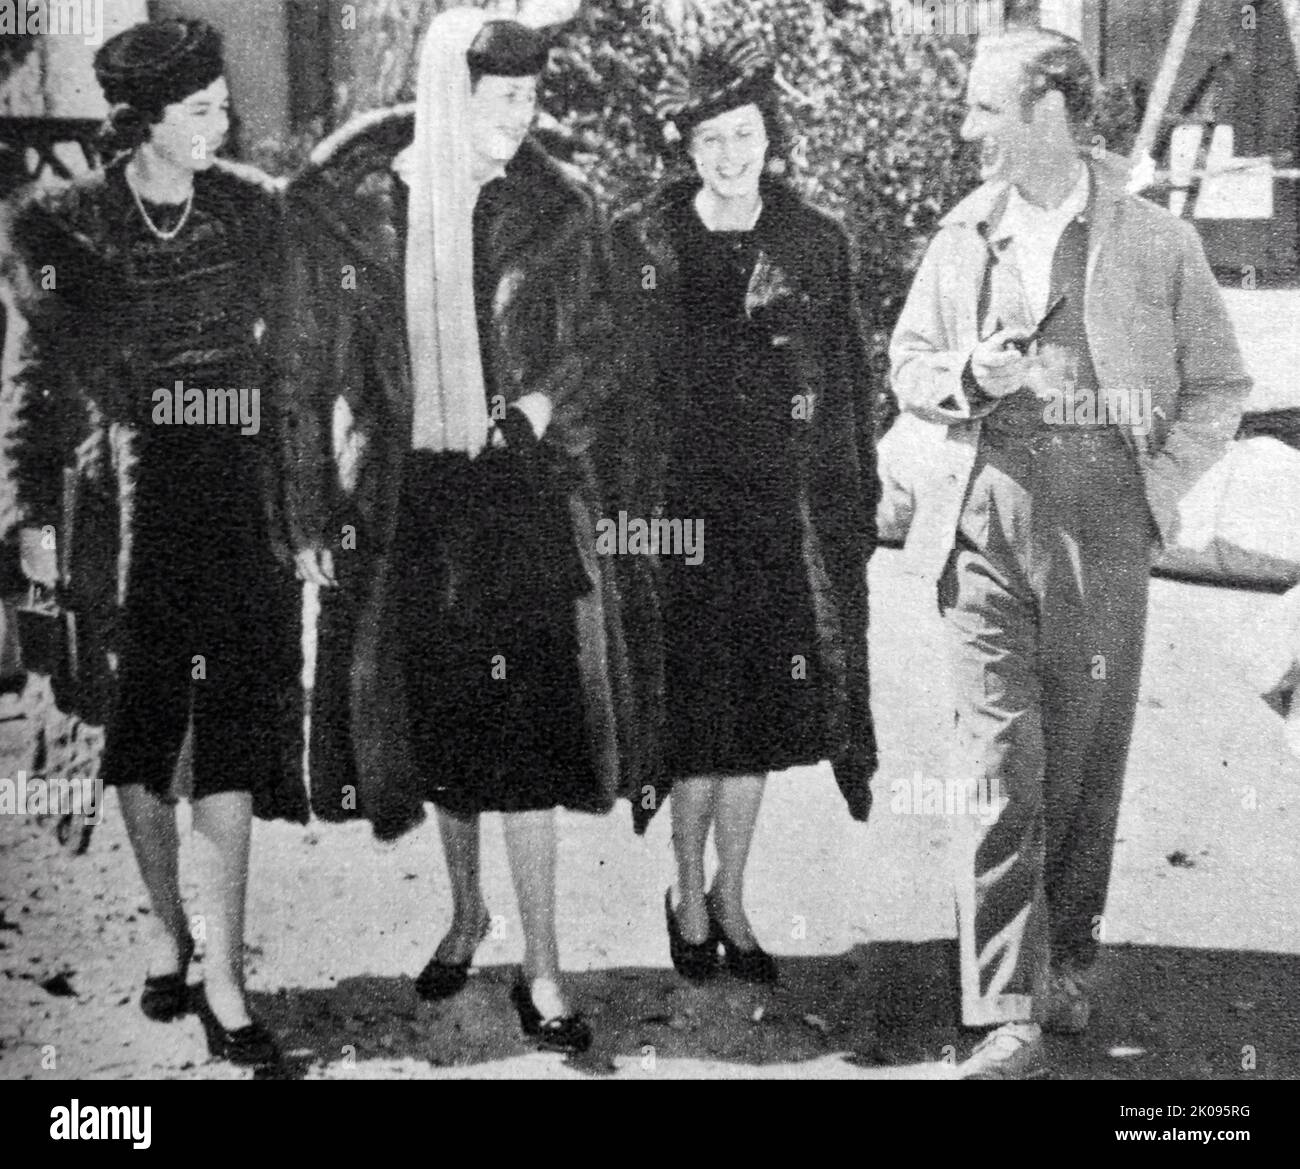 Actor Leslie Howard with the Duchess of Sutherland, Elizabeth Leveson-Gower, and Lady Margaret Egerton on the set of Gone with the Wind. Leslie Howard Steiner (3 April 1893 - 1 June 1943) was an English actor, director and producer. Gone with the Wind is a 1939 American epic historical romance film adapted from the 1936 novel by Margaret Mitchell. Stock Photo